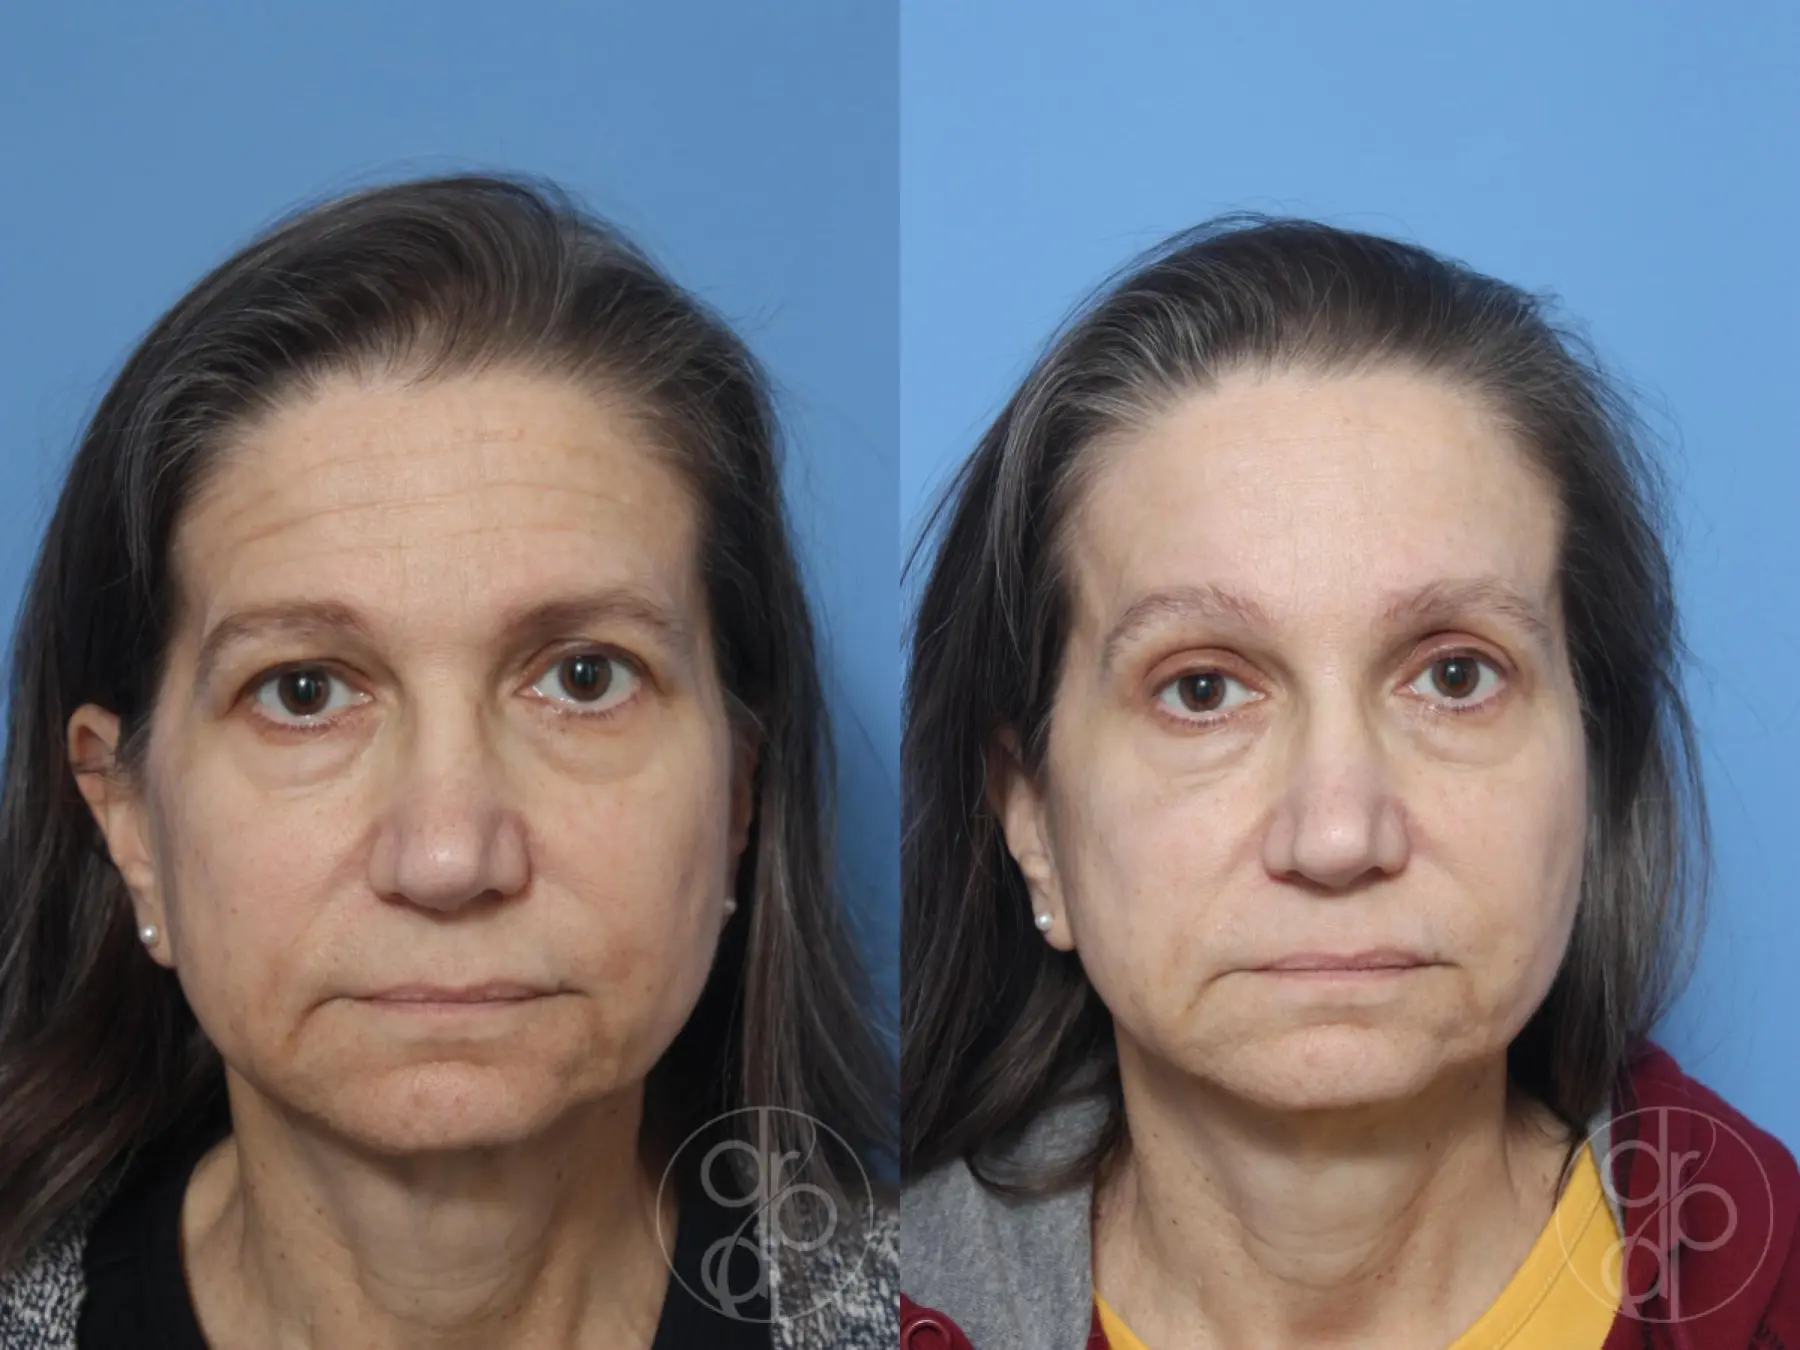 patient 12880 brow lift before and after result - Before and After 1